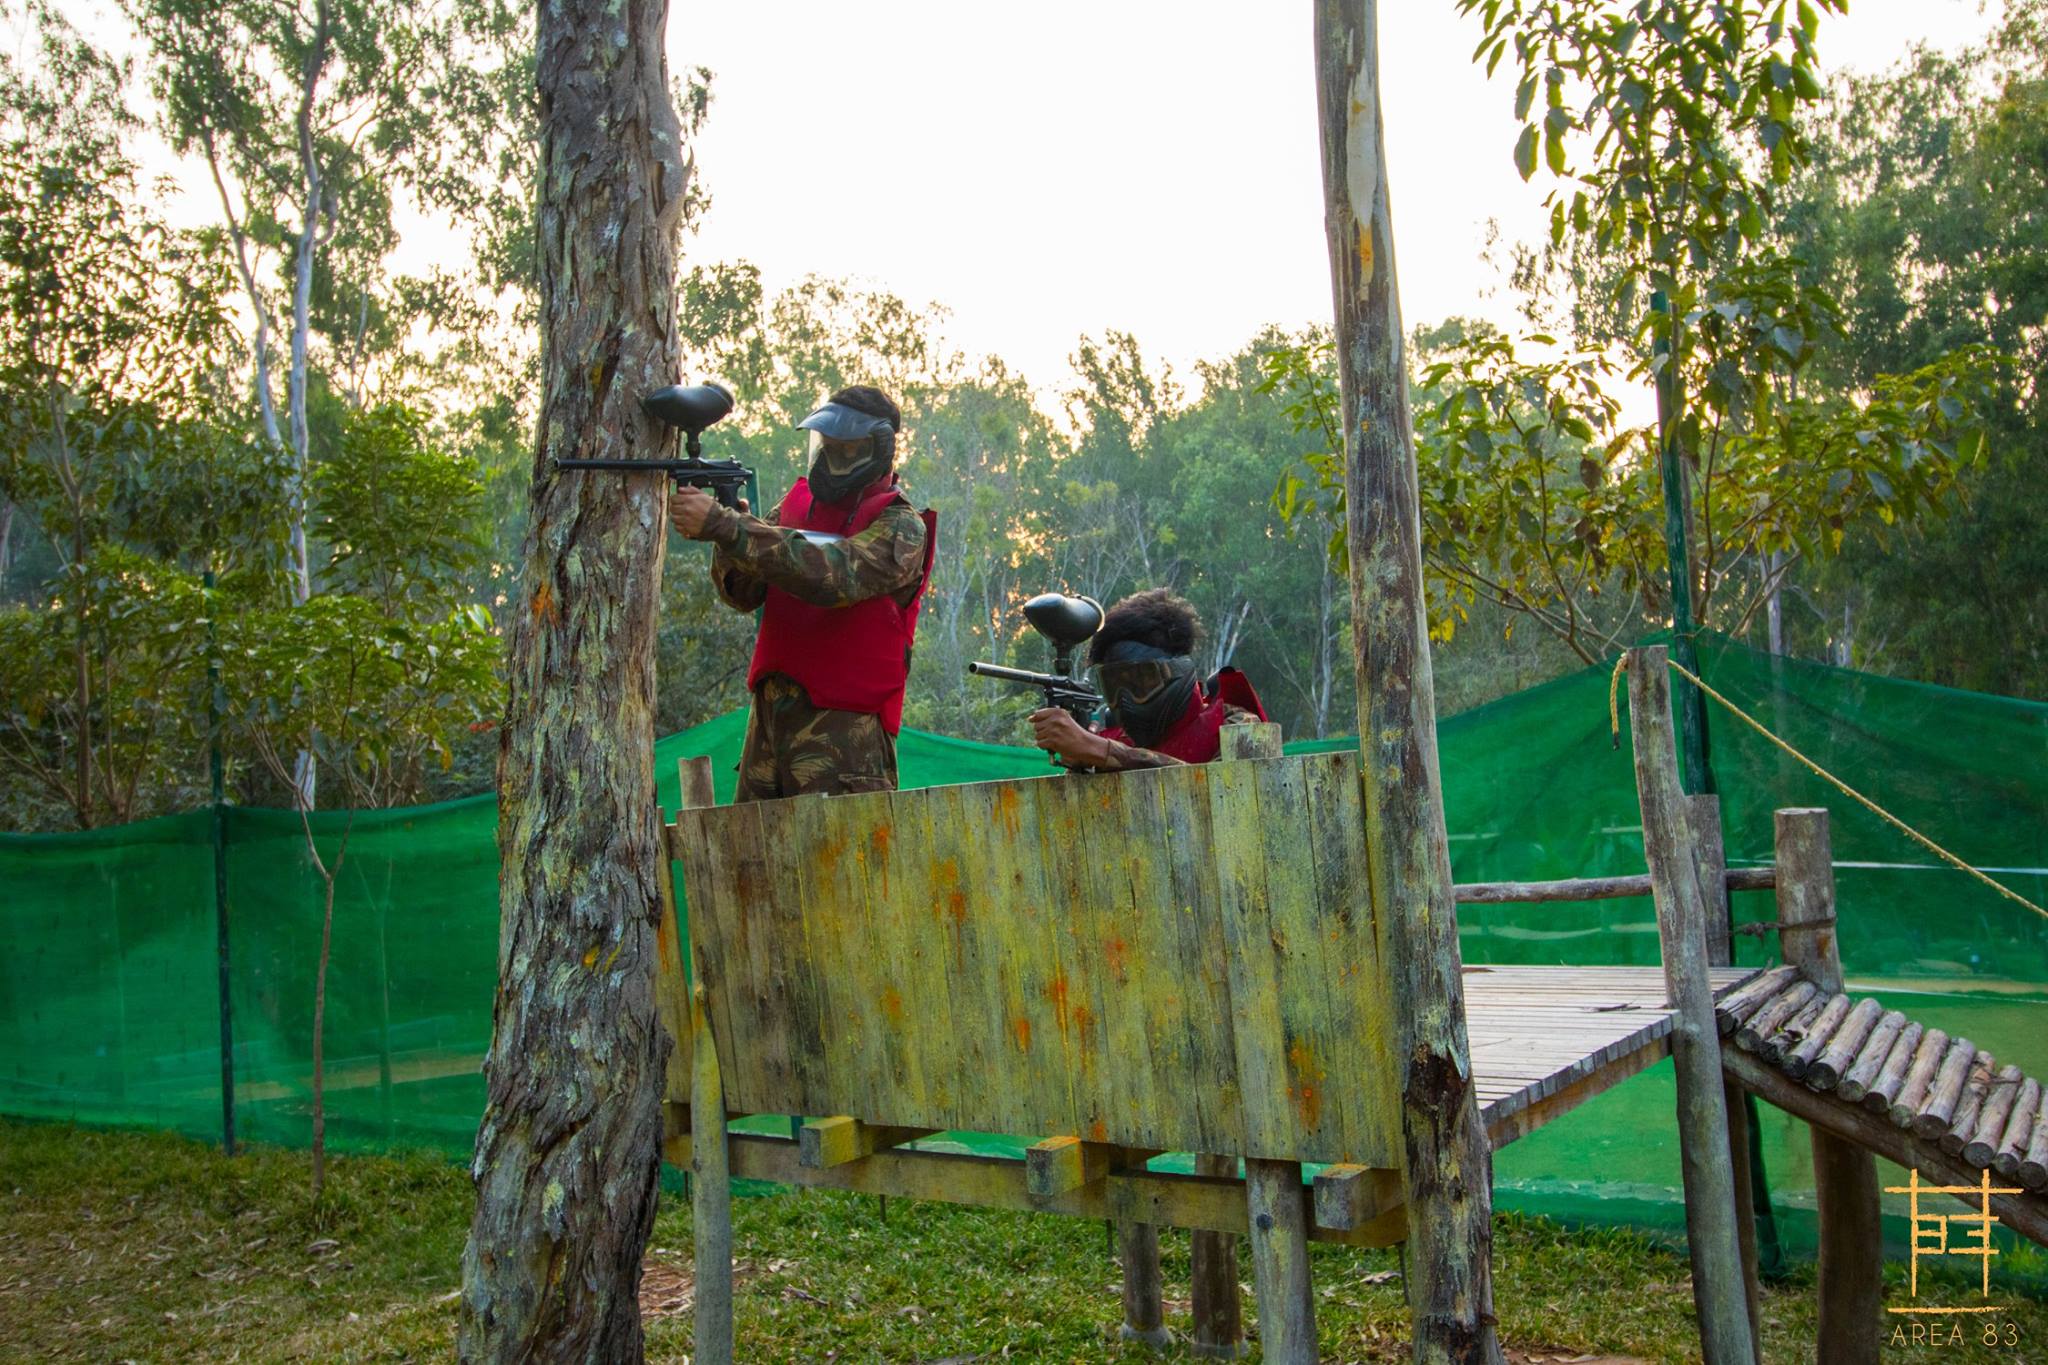 Paintball in Bangalore | Area83